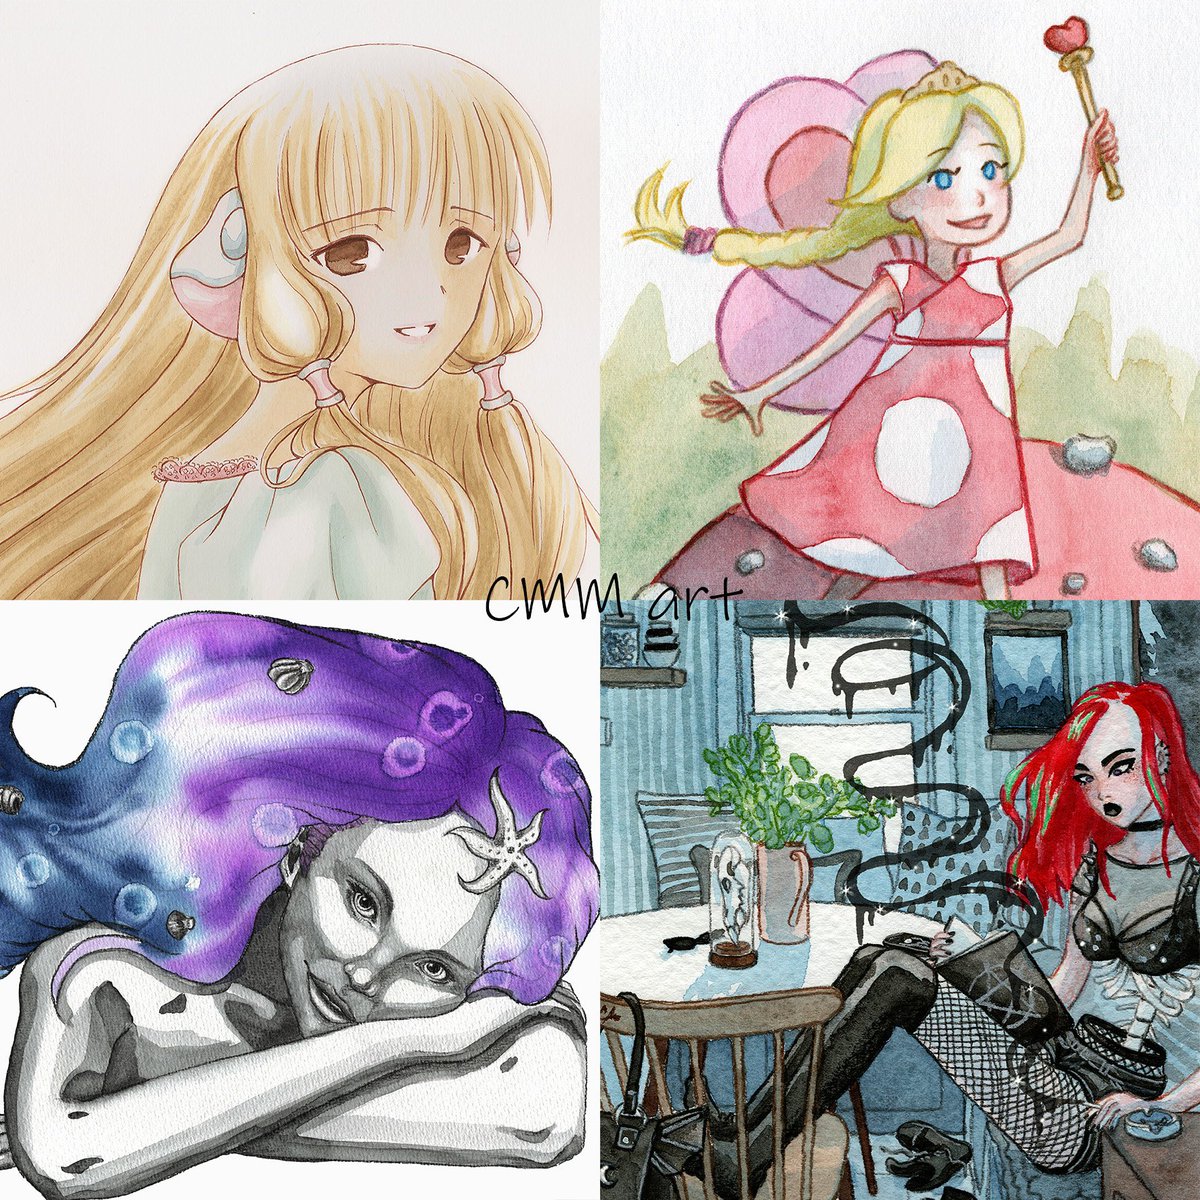 I've seen the #4styles and I thought it might be interesting to try it myself. So here are four girls in four different styles 😊 
#illustration #art #fourgirls #fanart #childrensbook #mermaid #drawthisinyourstyle #aquarellepainting #watercolourartist #mixedmedia #chobits